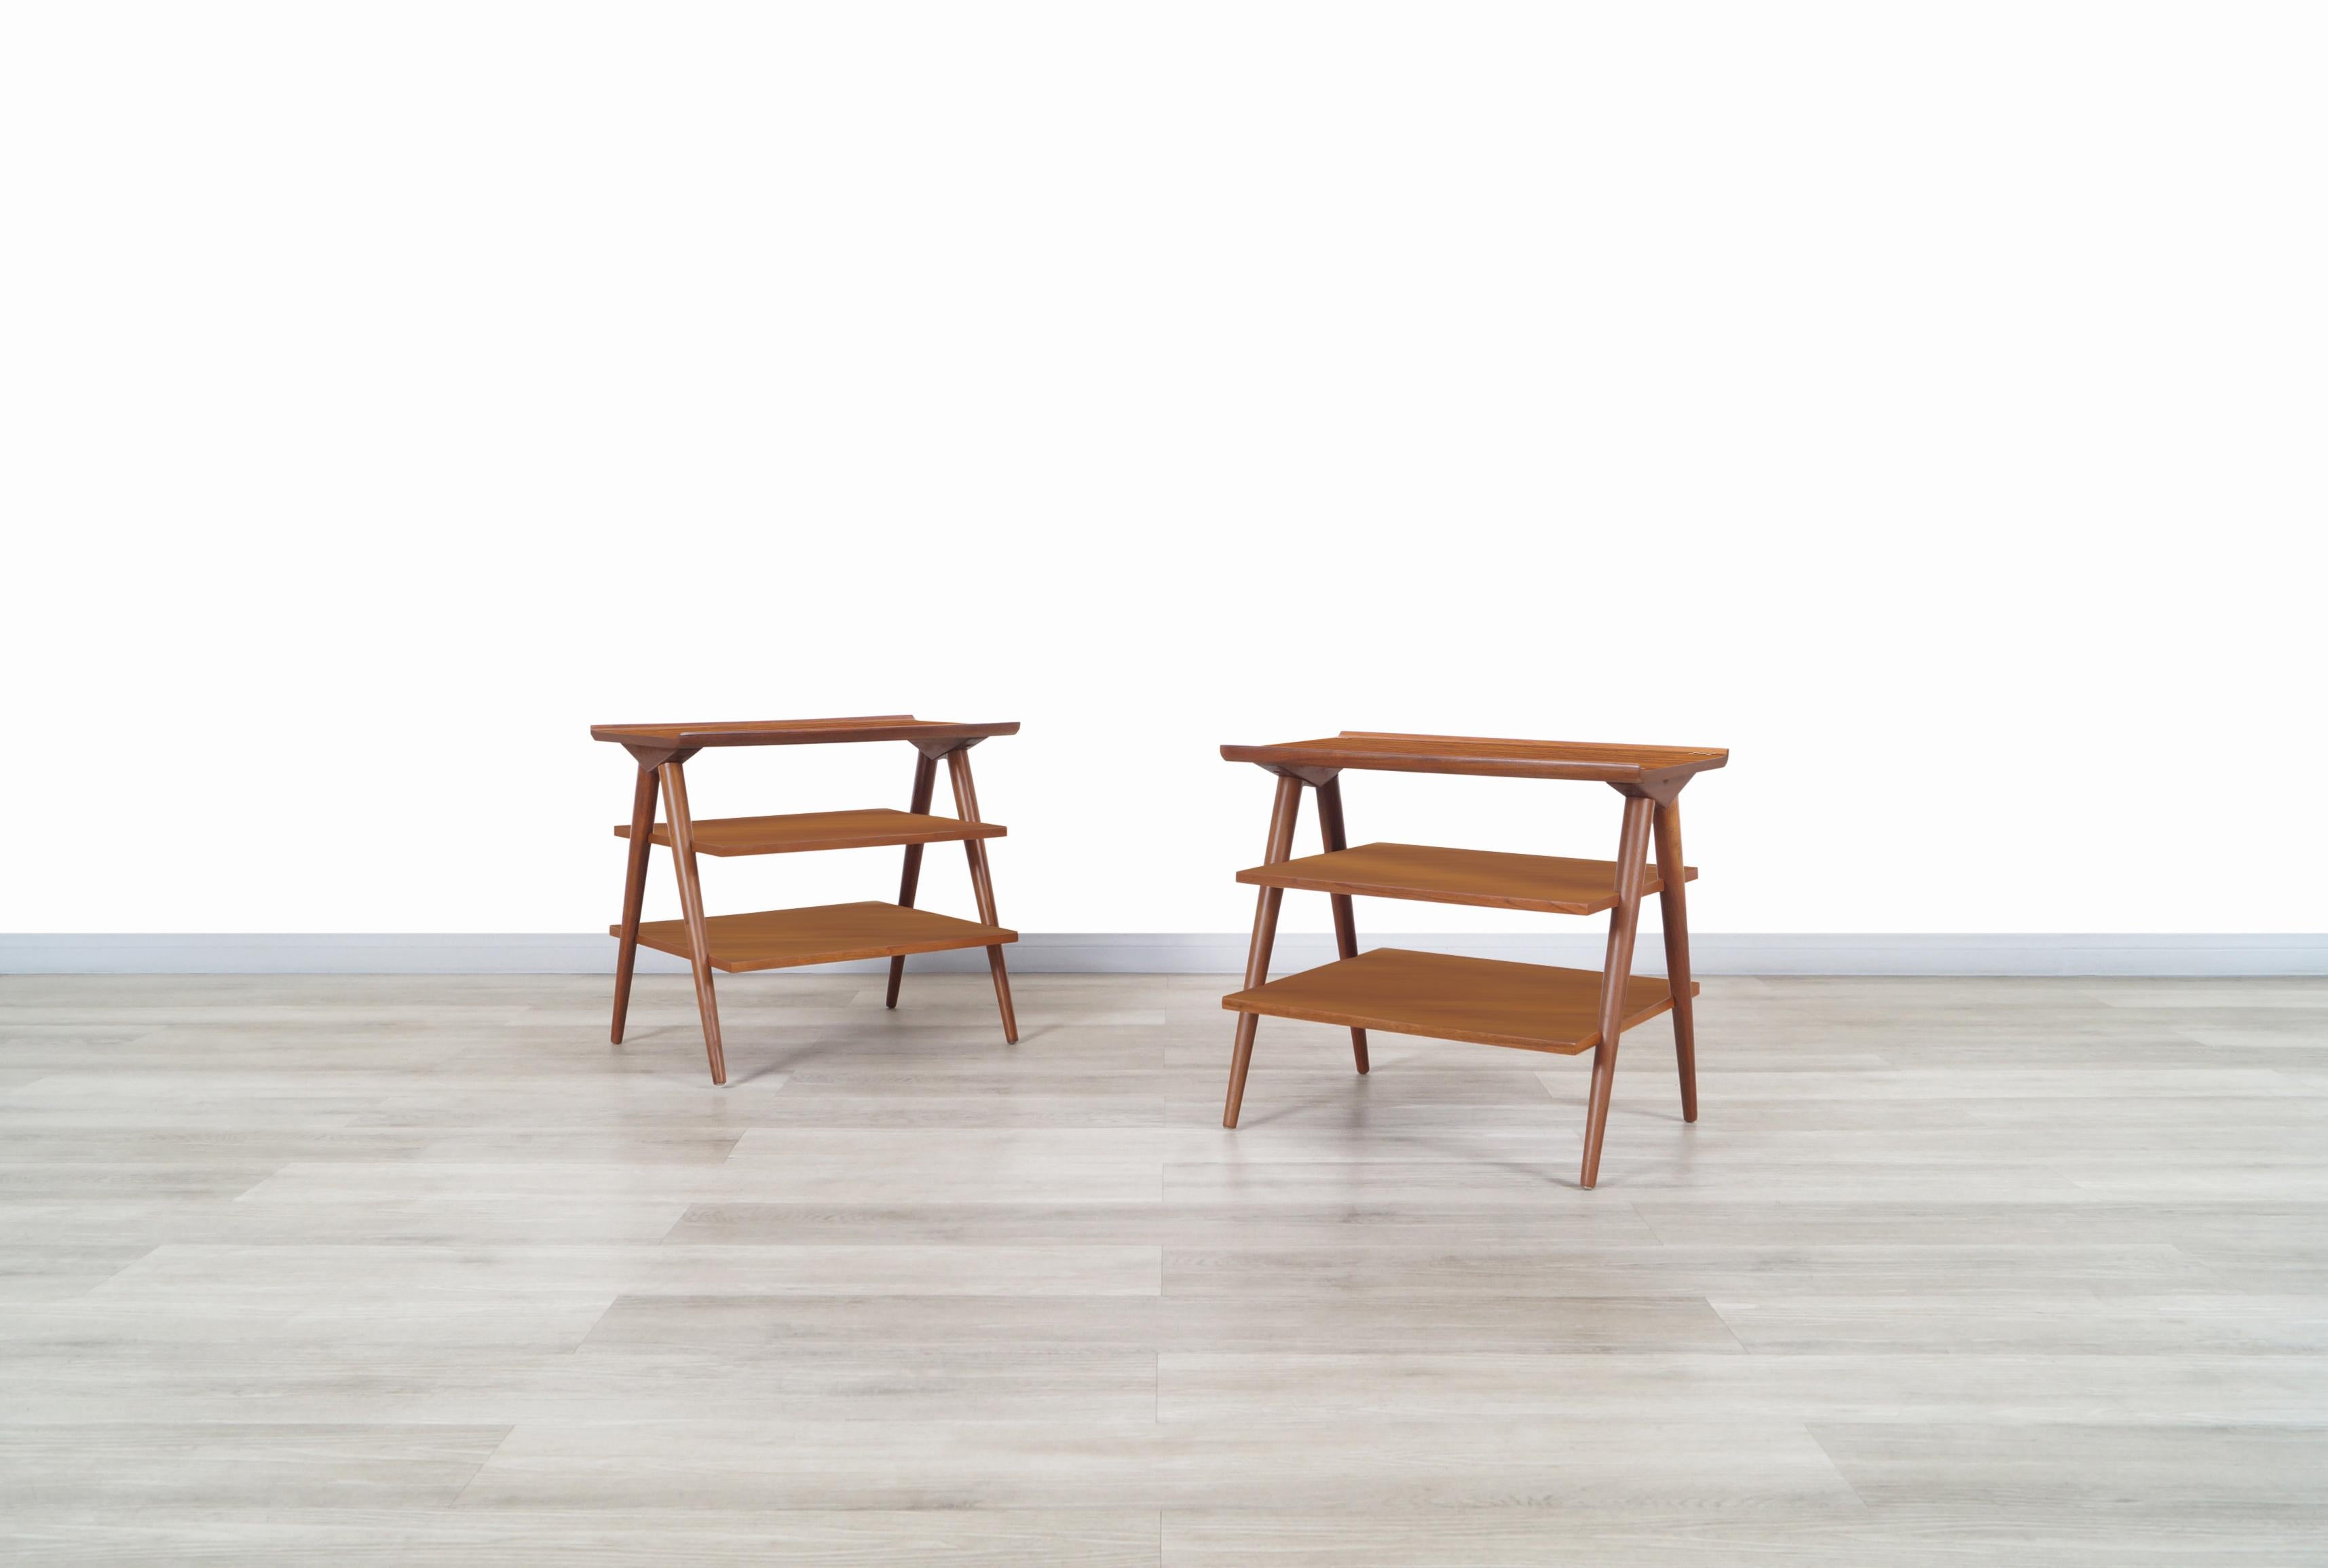 Stunning vintage three-tiered walnut tables designed by Merton L. Gershun for American of Martinsville in the United States, circa 1950s. These three-tiered tables have an avant-garde design where the fine walnut wood stands out throughout its